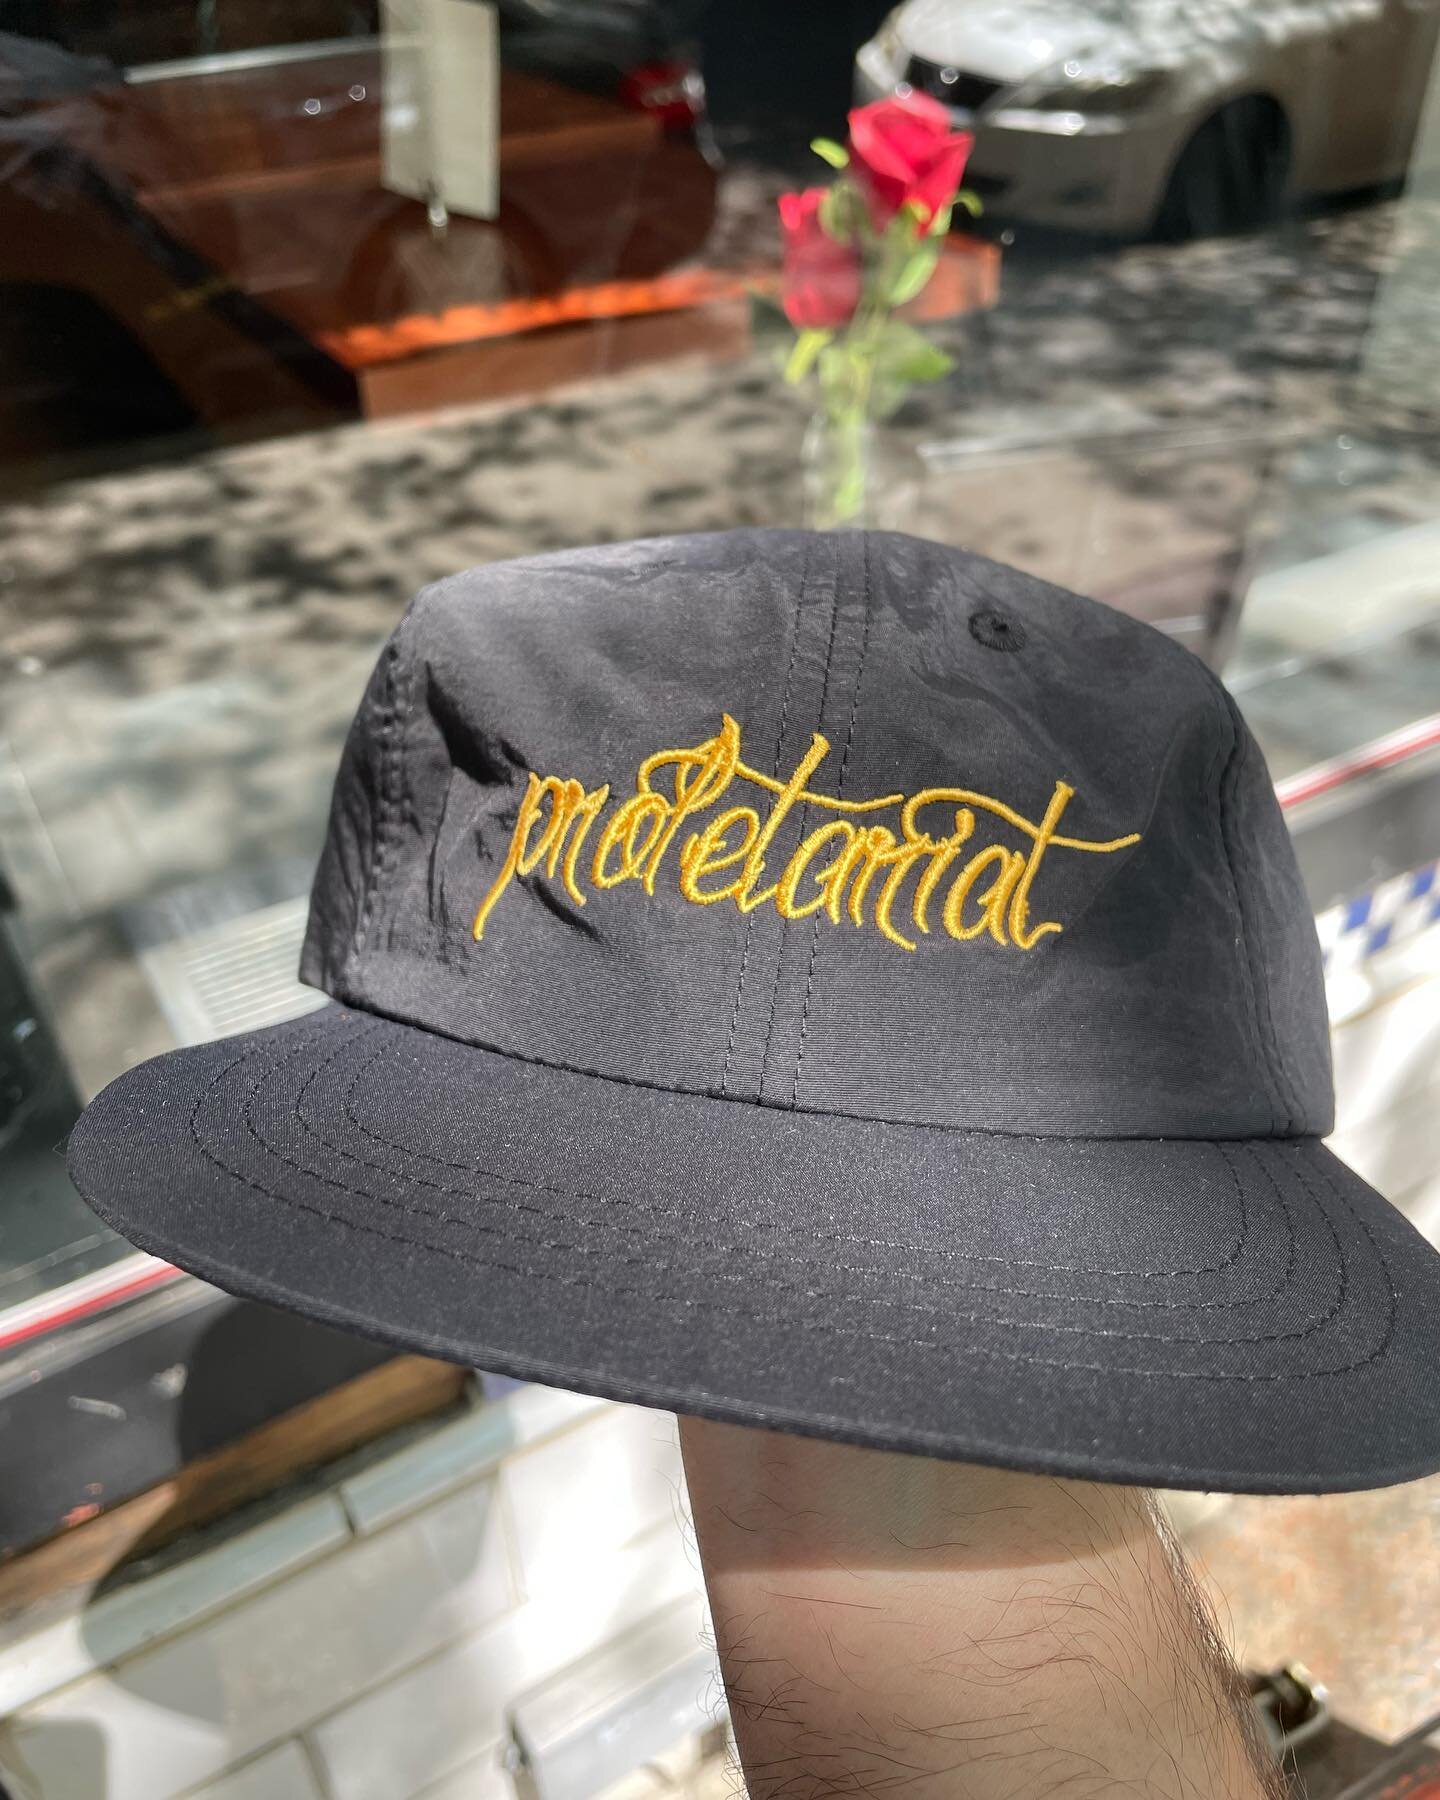 New merch alert! Embroidered 6-panel lightweight nylon hats - Logo + rare new and unusual beer in the back. Thanks to @pantherprintingcompany for their fine work. 

Grab one at www.proletariatny.com or pick up at the bar 👿⛓☠️

Limited supply.